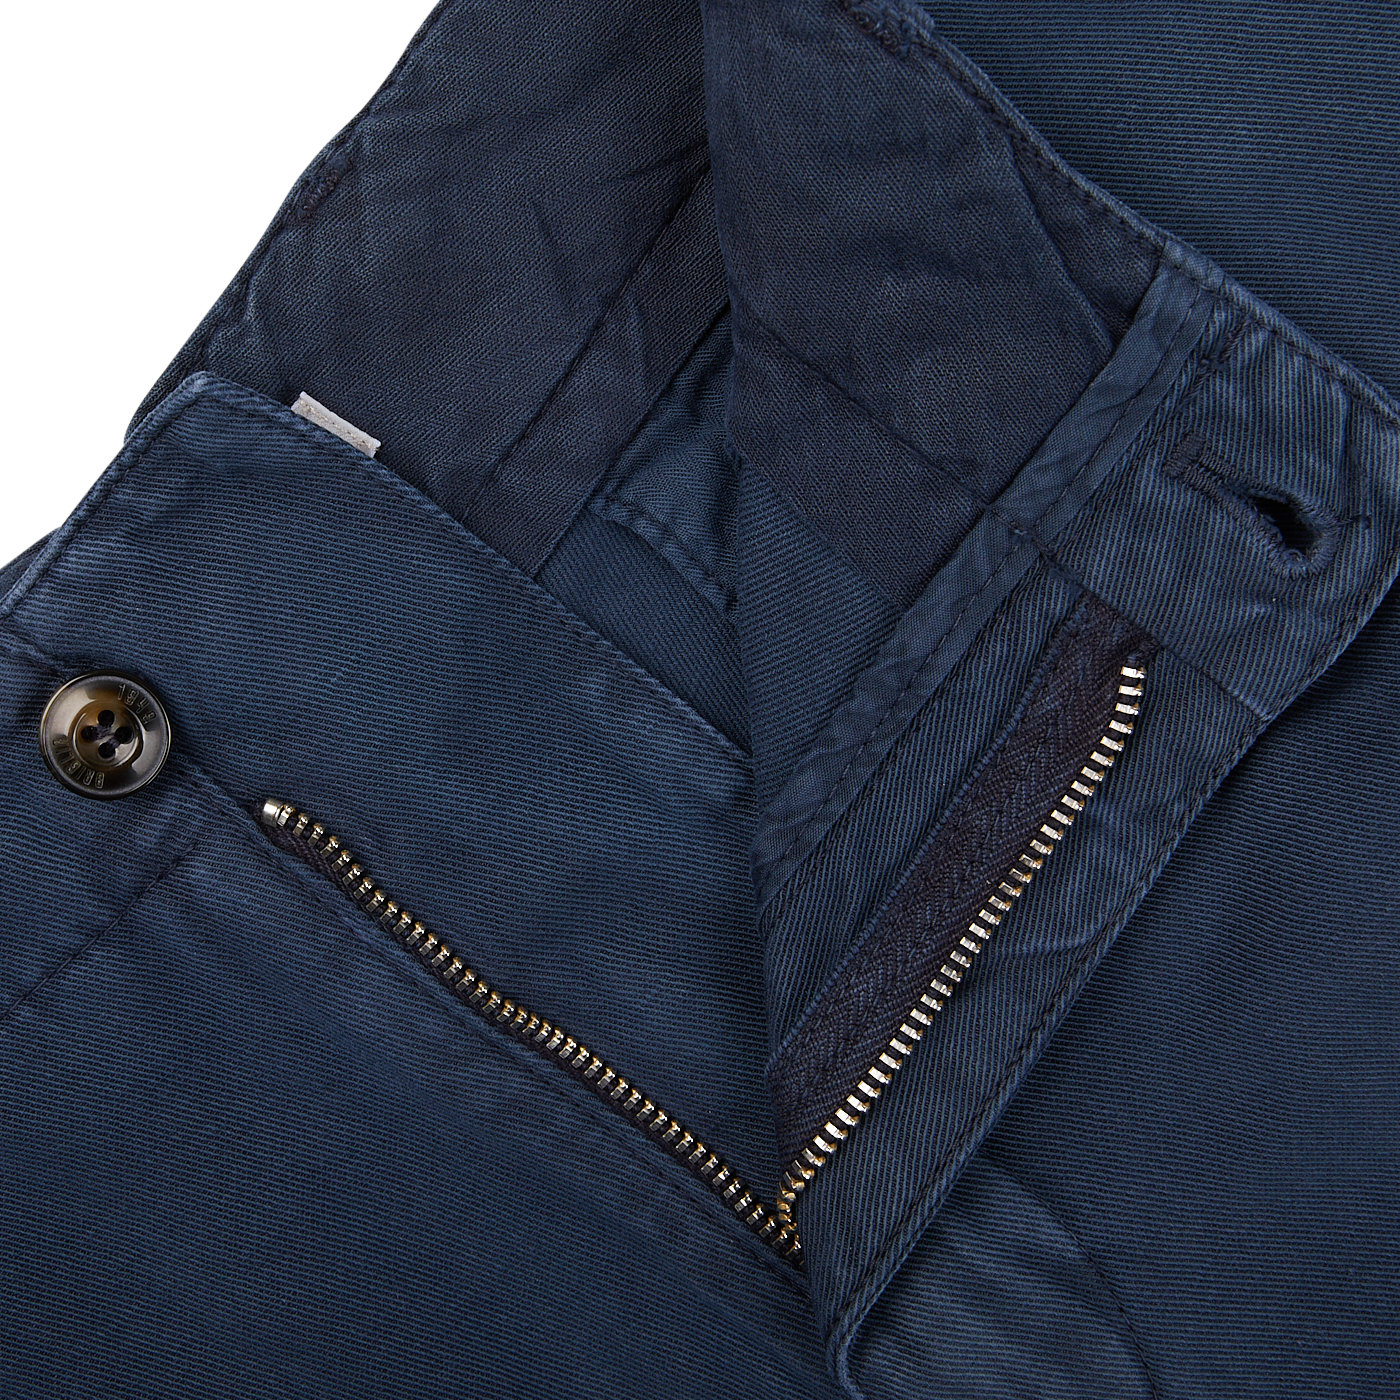 Close-up of a Briglia navy blue cotton linen pleated shorts with a zipper pocket detail and an adjustable waistband.